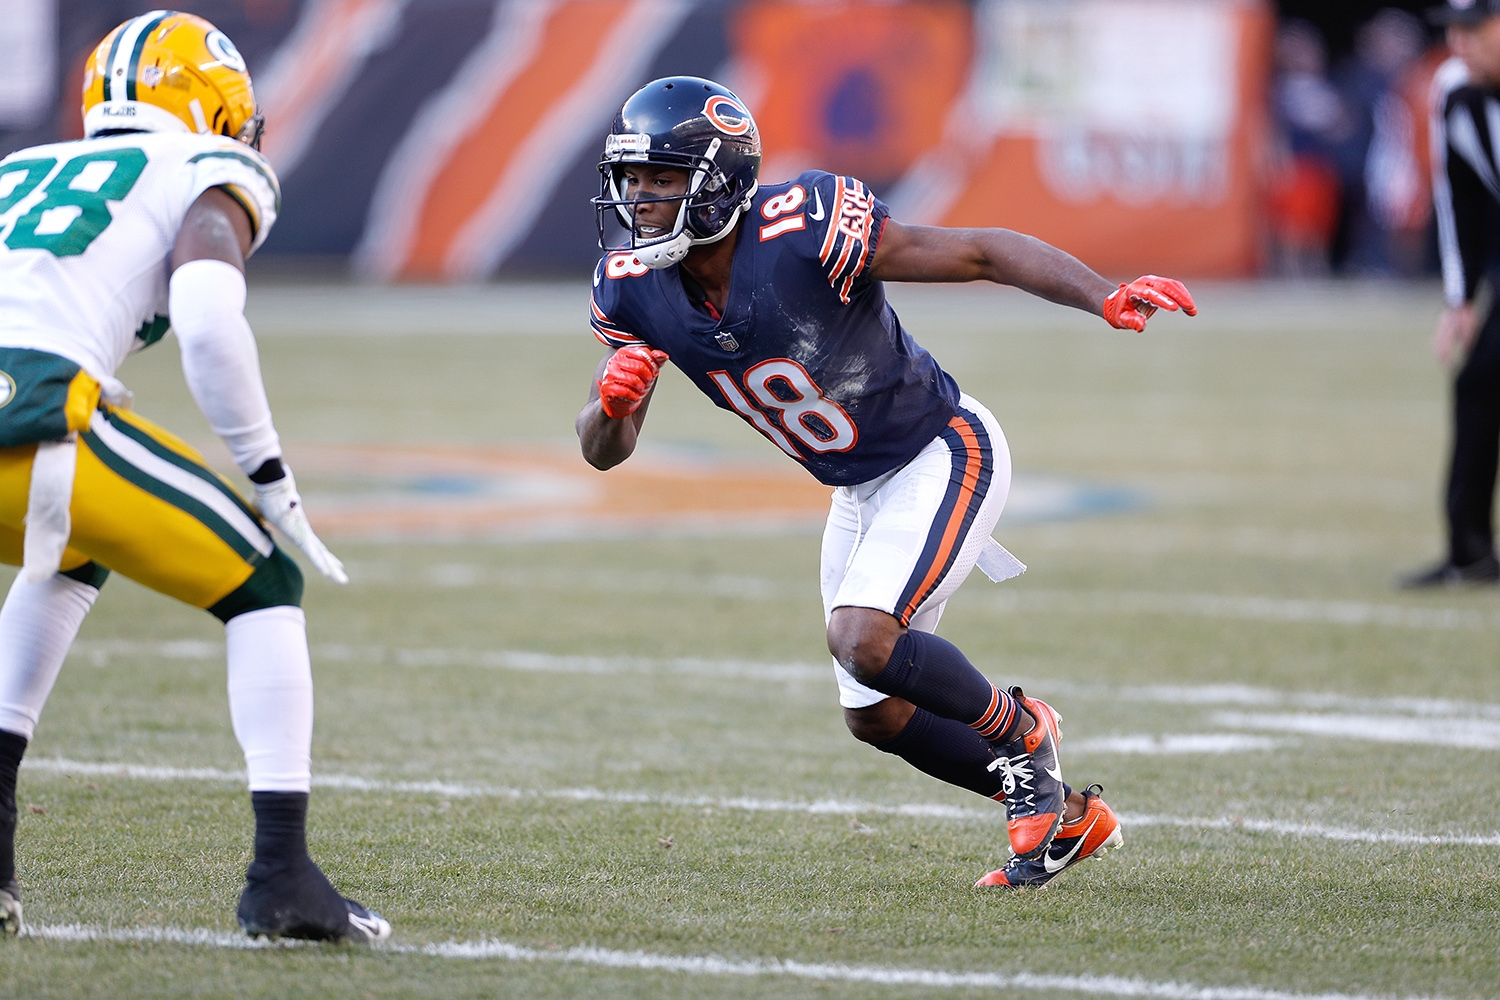 Taylor Gabriel and the Chicago Bears renew their longtime rivalry with the Green Bay Packers tonight in the NFL regular-season opener on NBC.